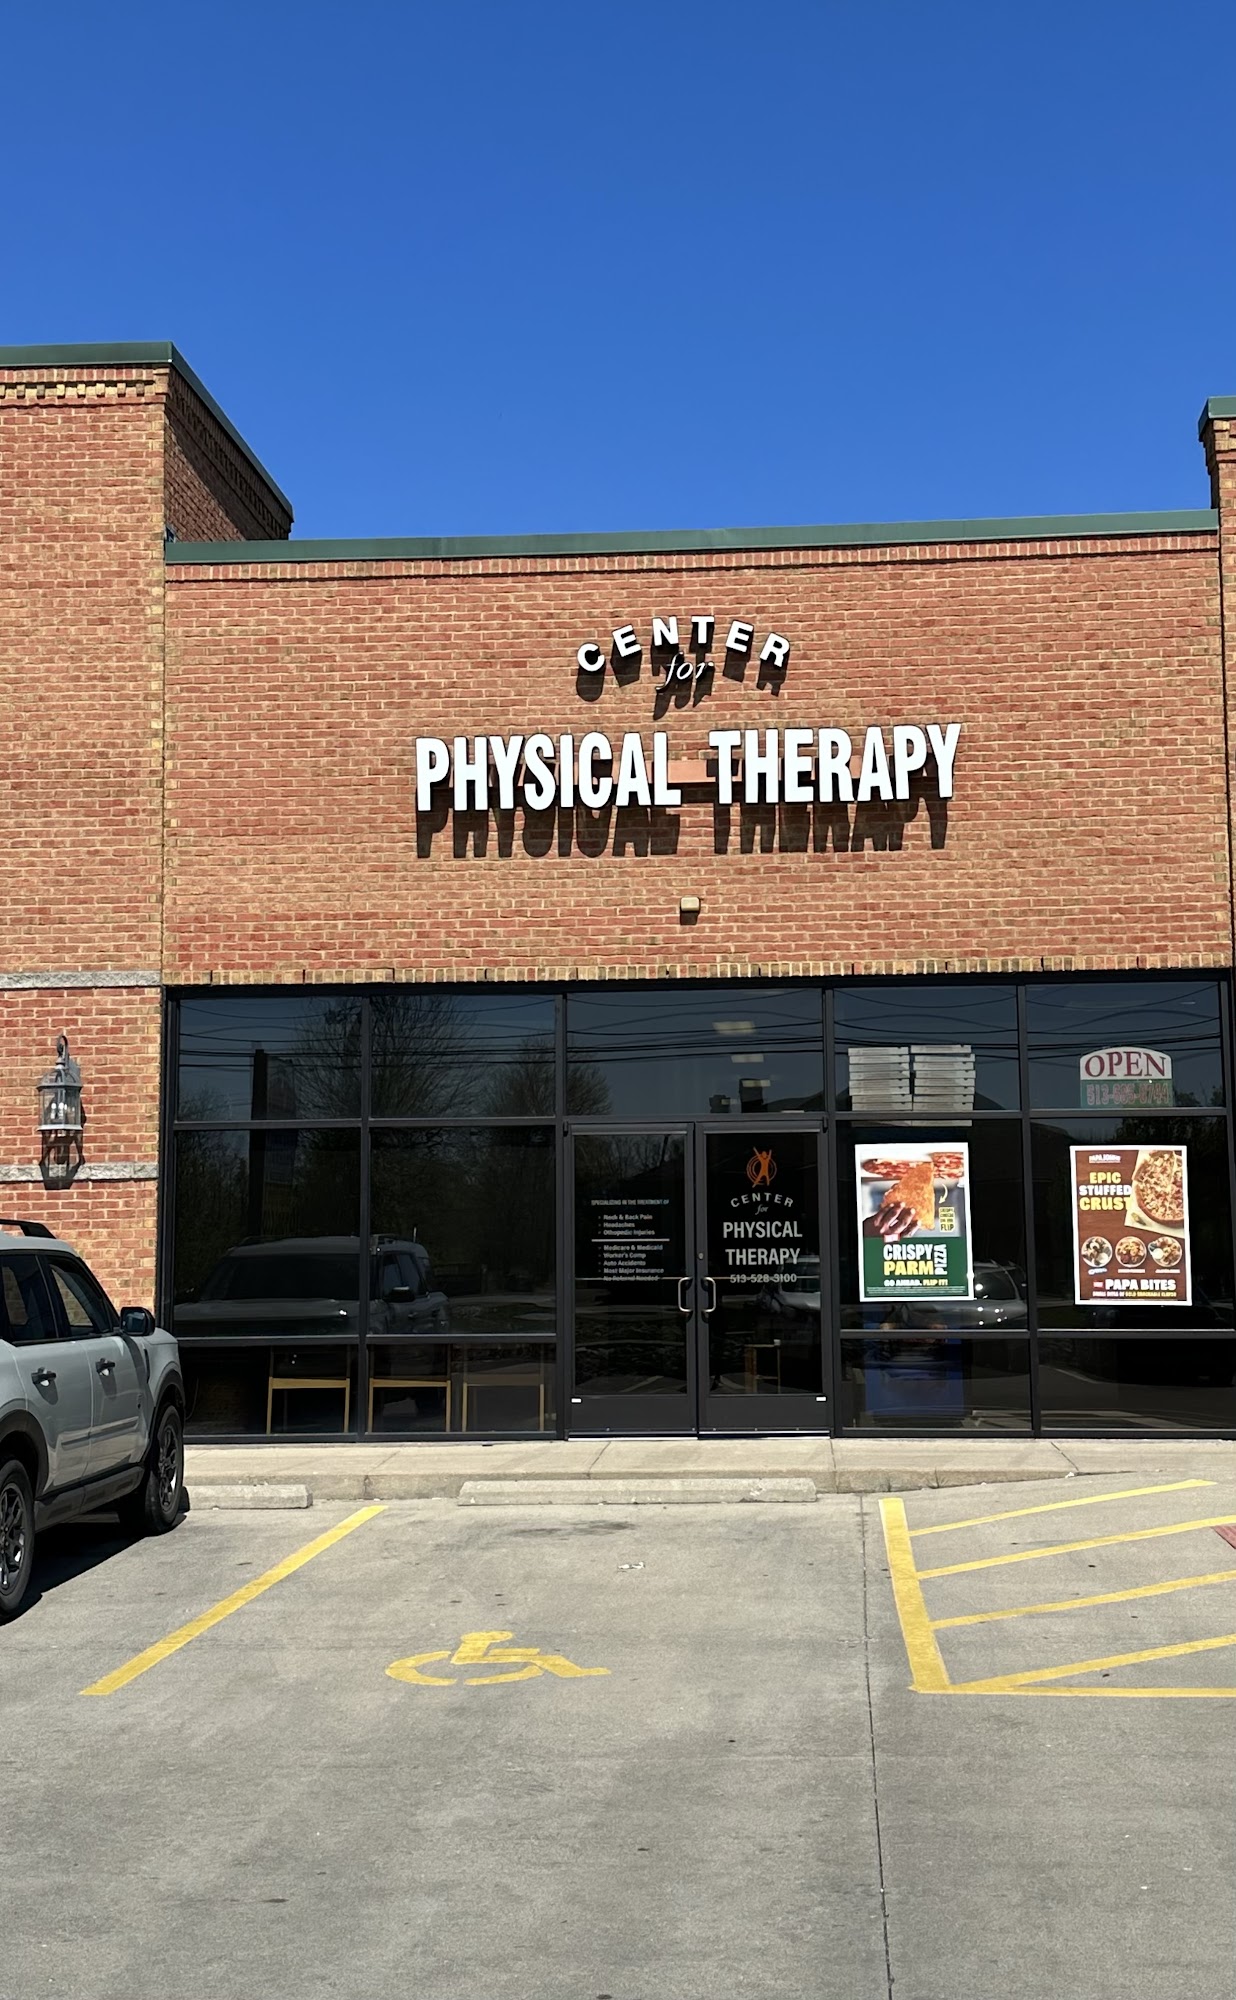 Center for Physical Therapy 2234 Bauer Rd, Batavia Ohio 45103